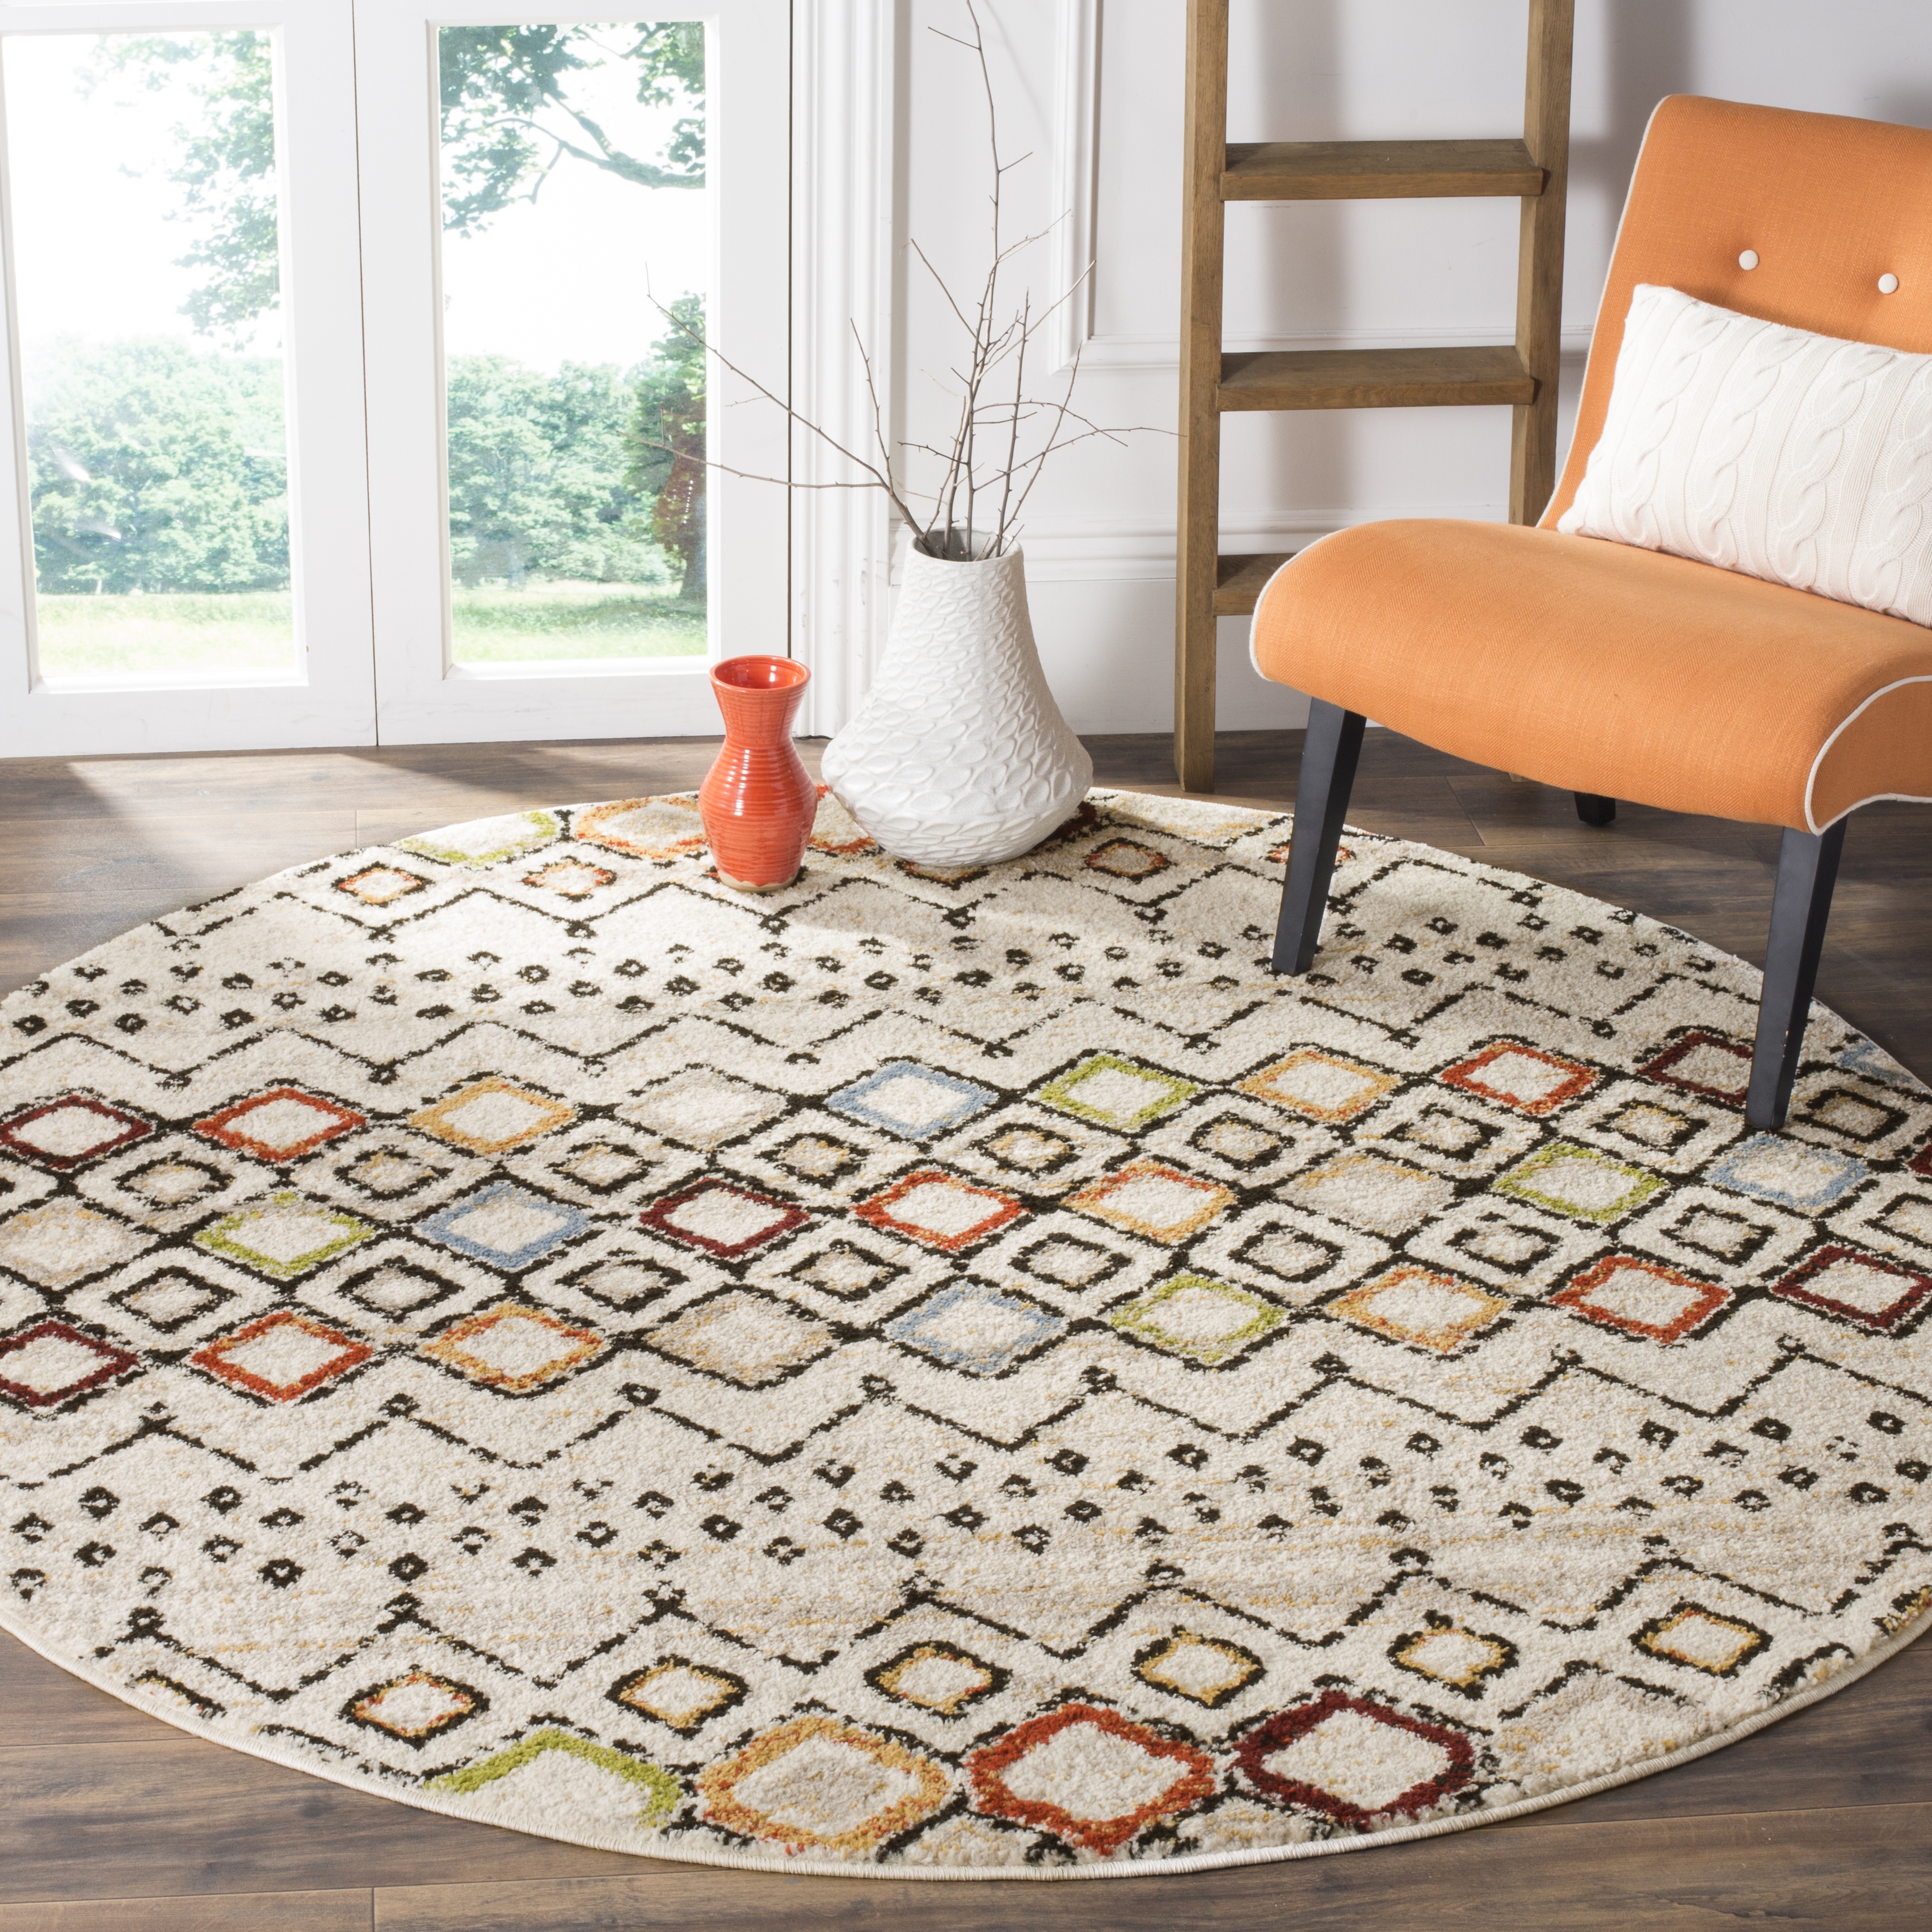 Arlo Home Woven Area Rug, AMS108K, Ivory/Multi,  6' 7" X 6' 7" Round - Image 1